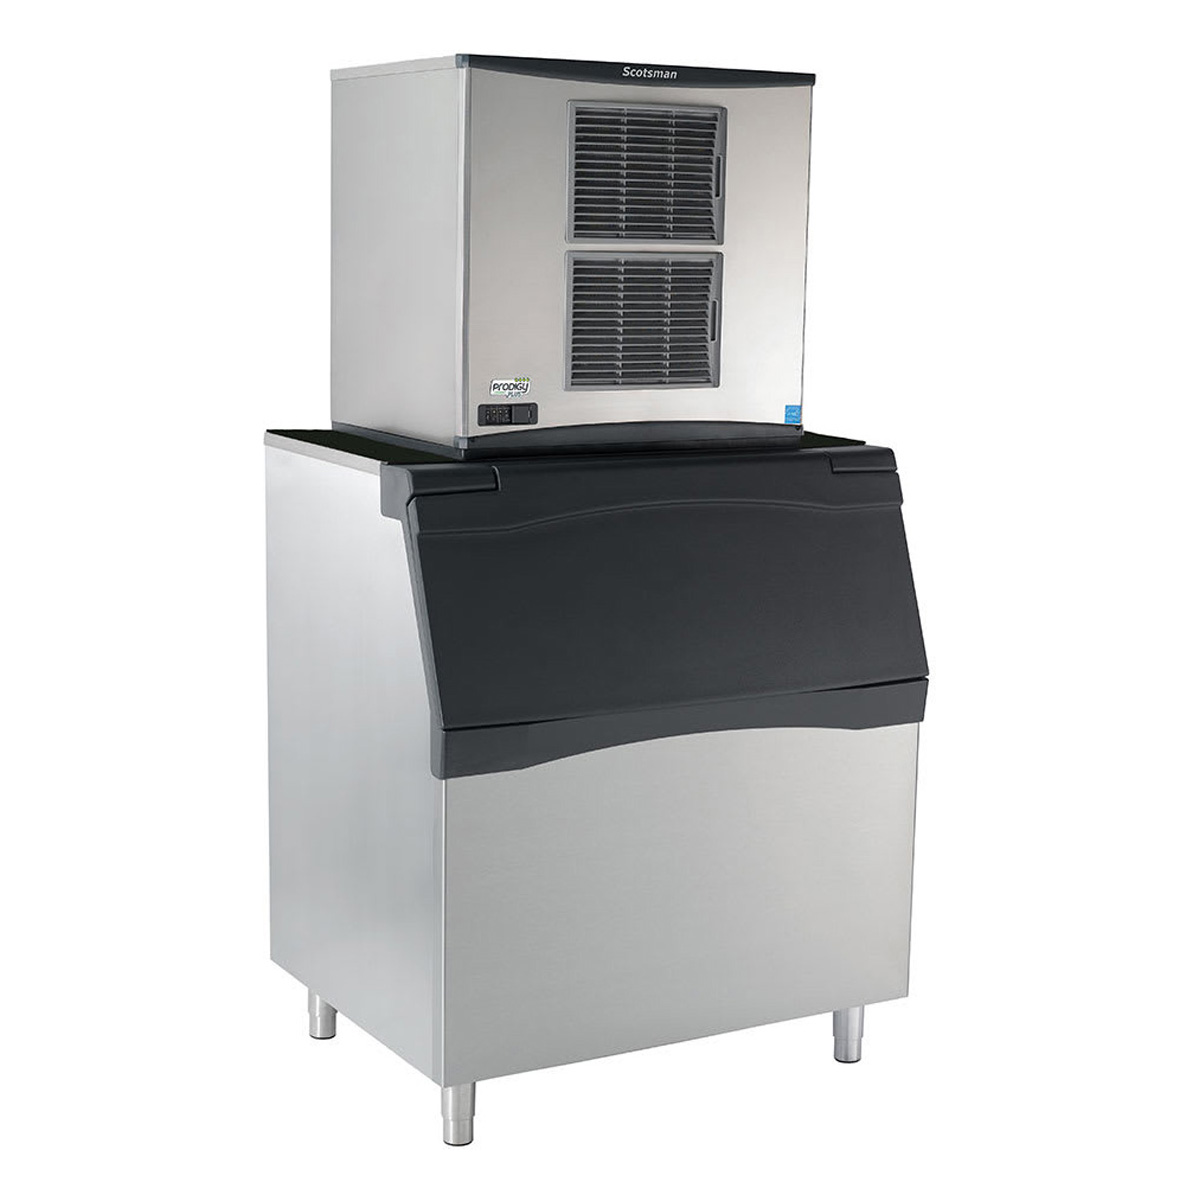 Scotsman C0630MW-32/B842S/KBT29 633 lbs Water Cooled Full Cube Ice Maker with Bin 778 lbs Storage